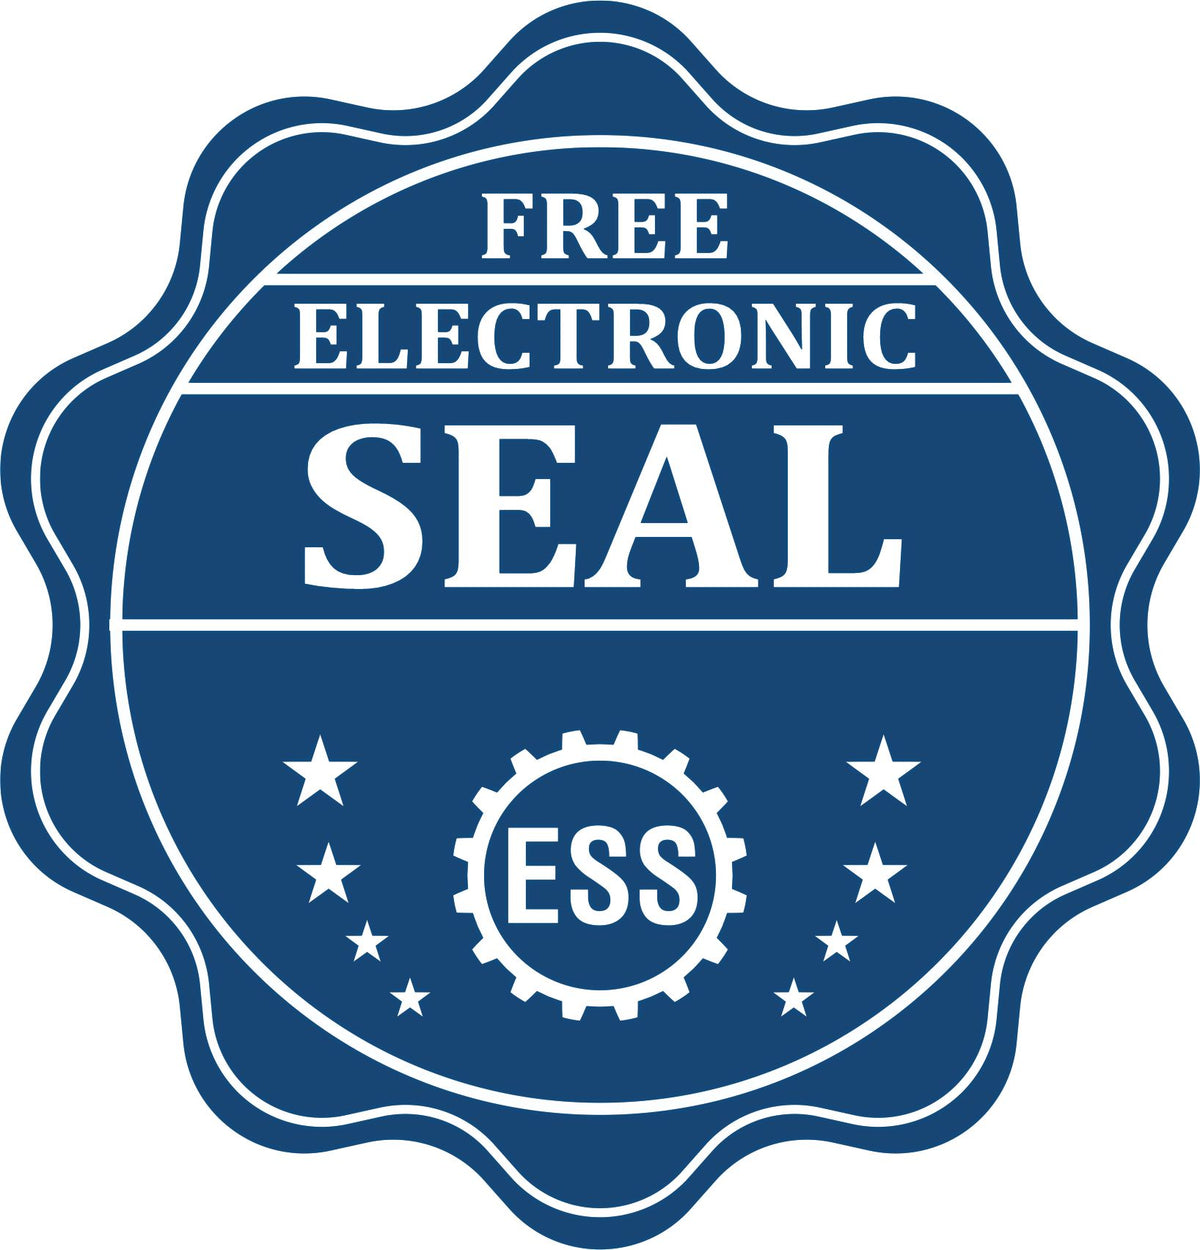 A badge showing a free electronic seal for the Premium MaxLight Pre-Inked Rhode Island Geology Stamp with stars and the ESS gear on the emblem.